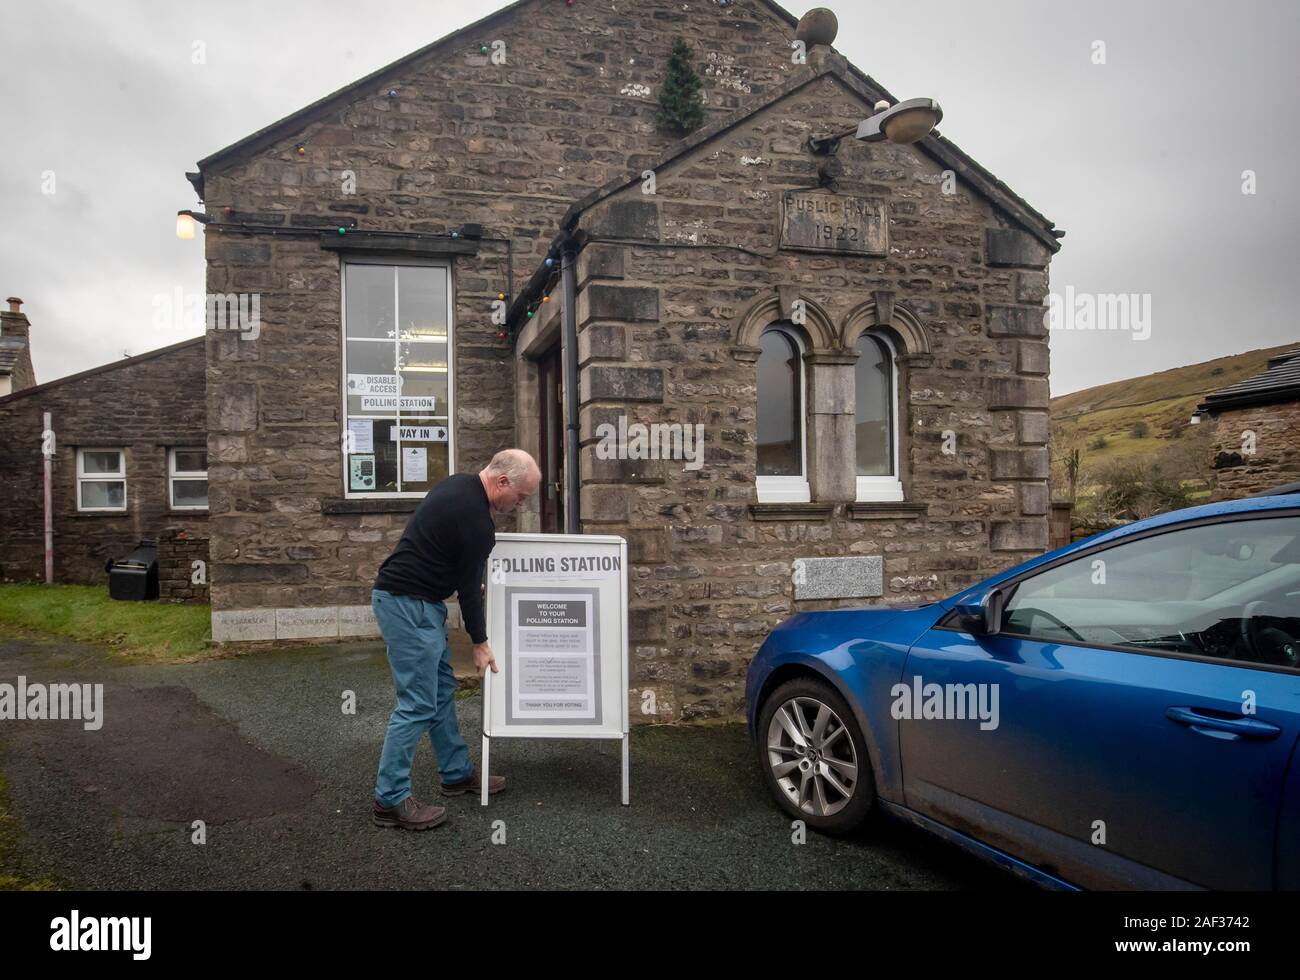 A man moves a polling station sign in Muker, Yorkshire, as voters go to the polls in what has been billed as the most important General Election in a generation. Stock Photo